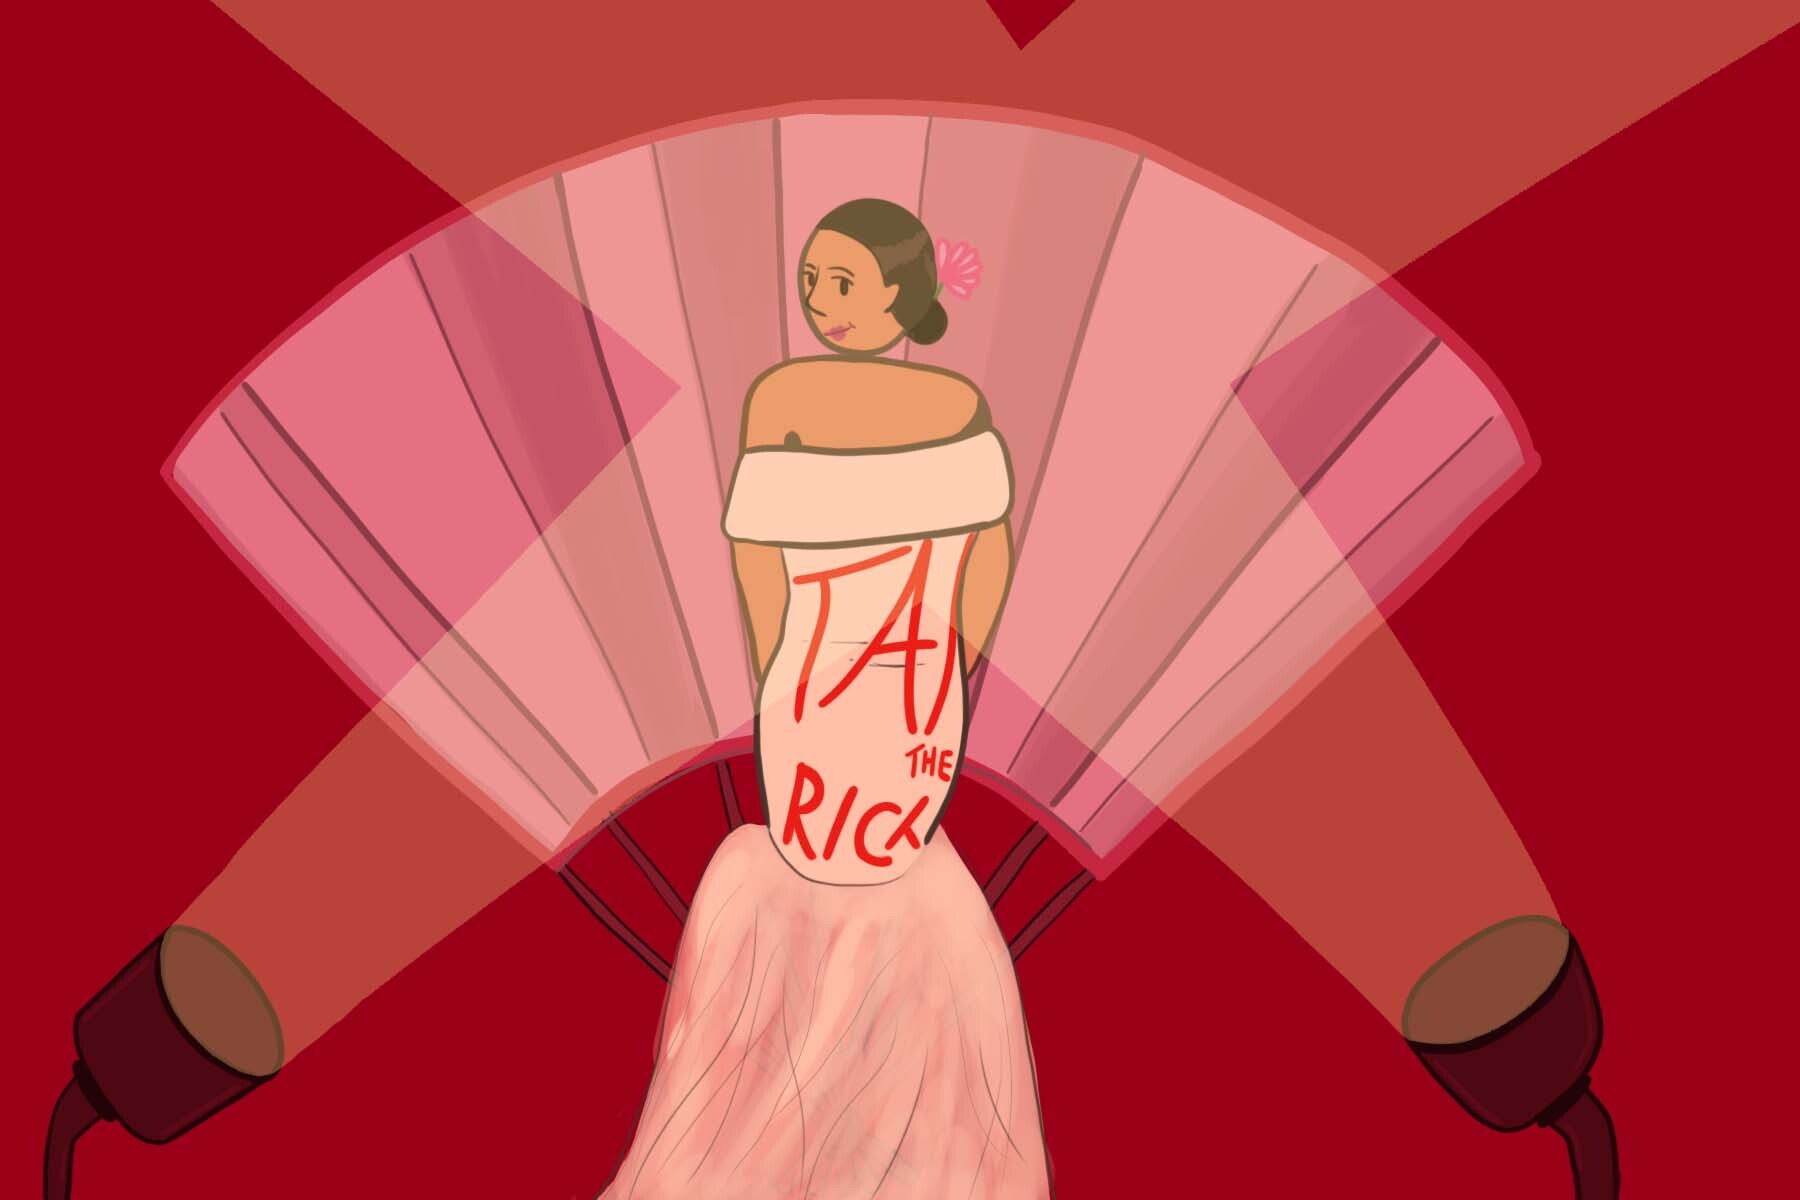 illustration of Alexandria Ocasio-Cortez and her "Tax the Rich" dress